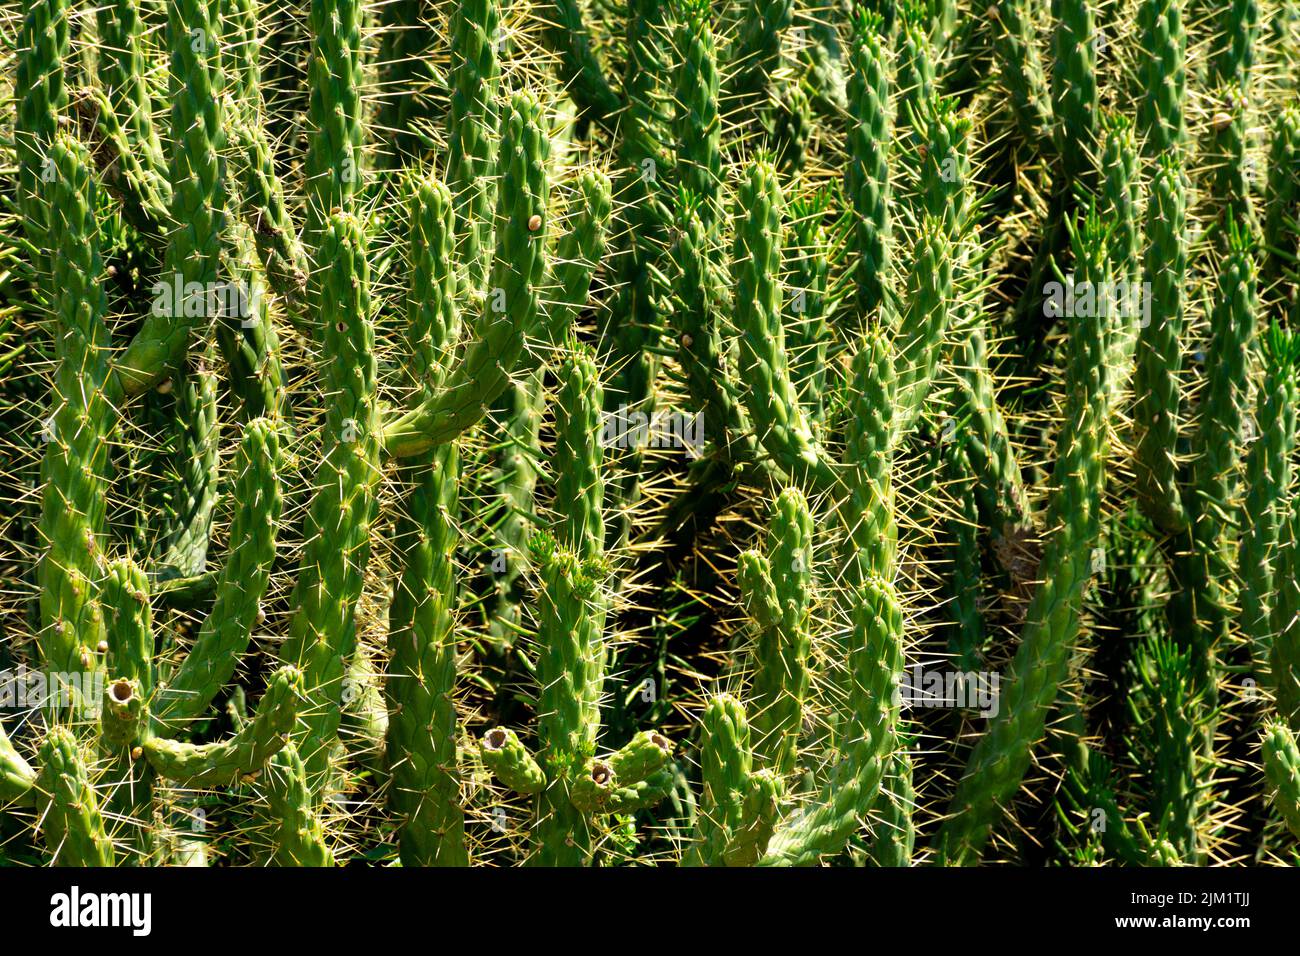 Large wild cactus Austrocylindropuntia subulata exaltata with many branches and with bright spines against the light. Horizontal image Stock Photo